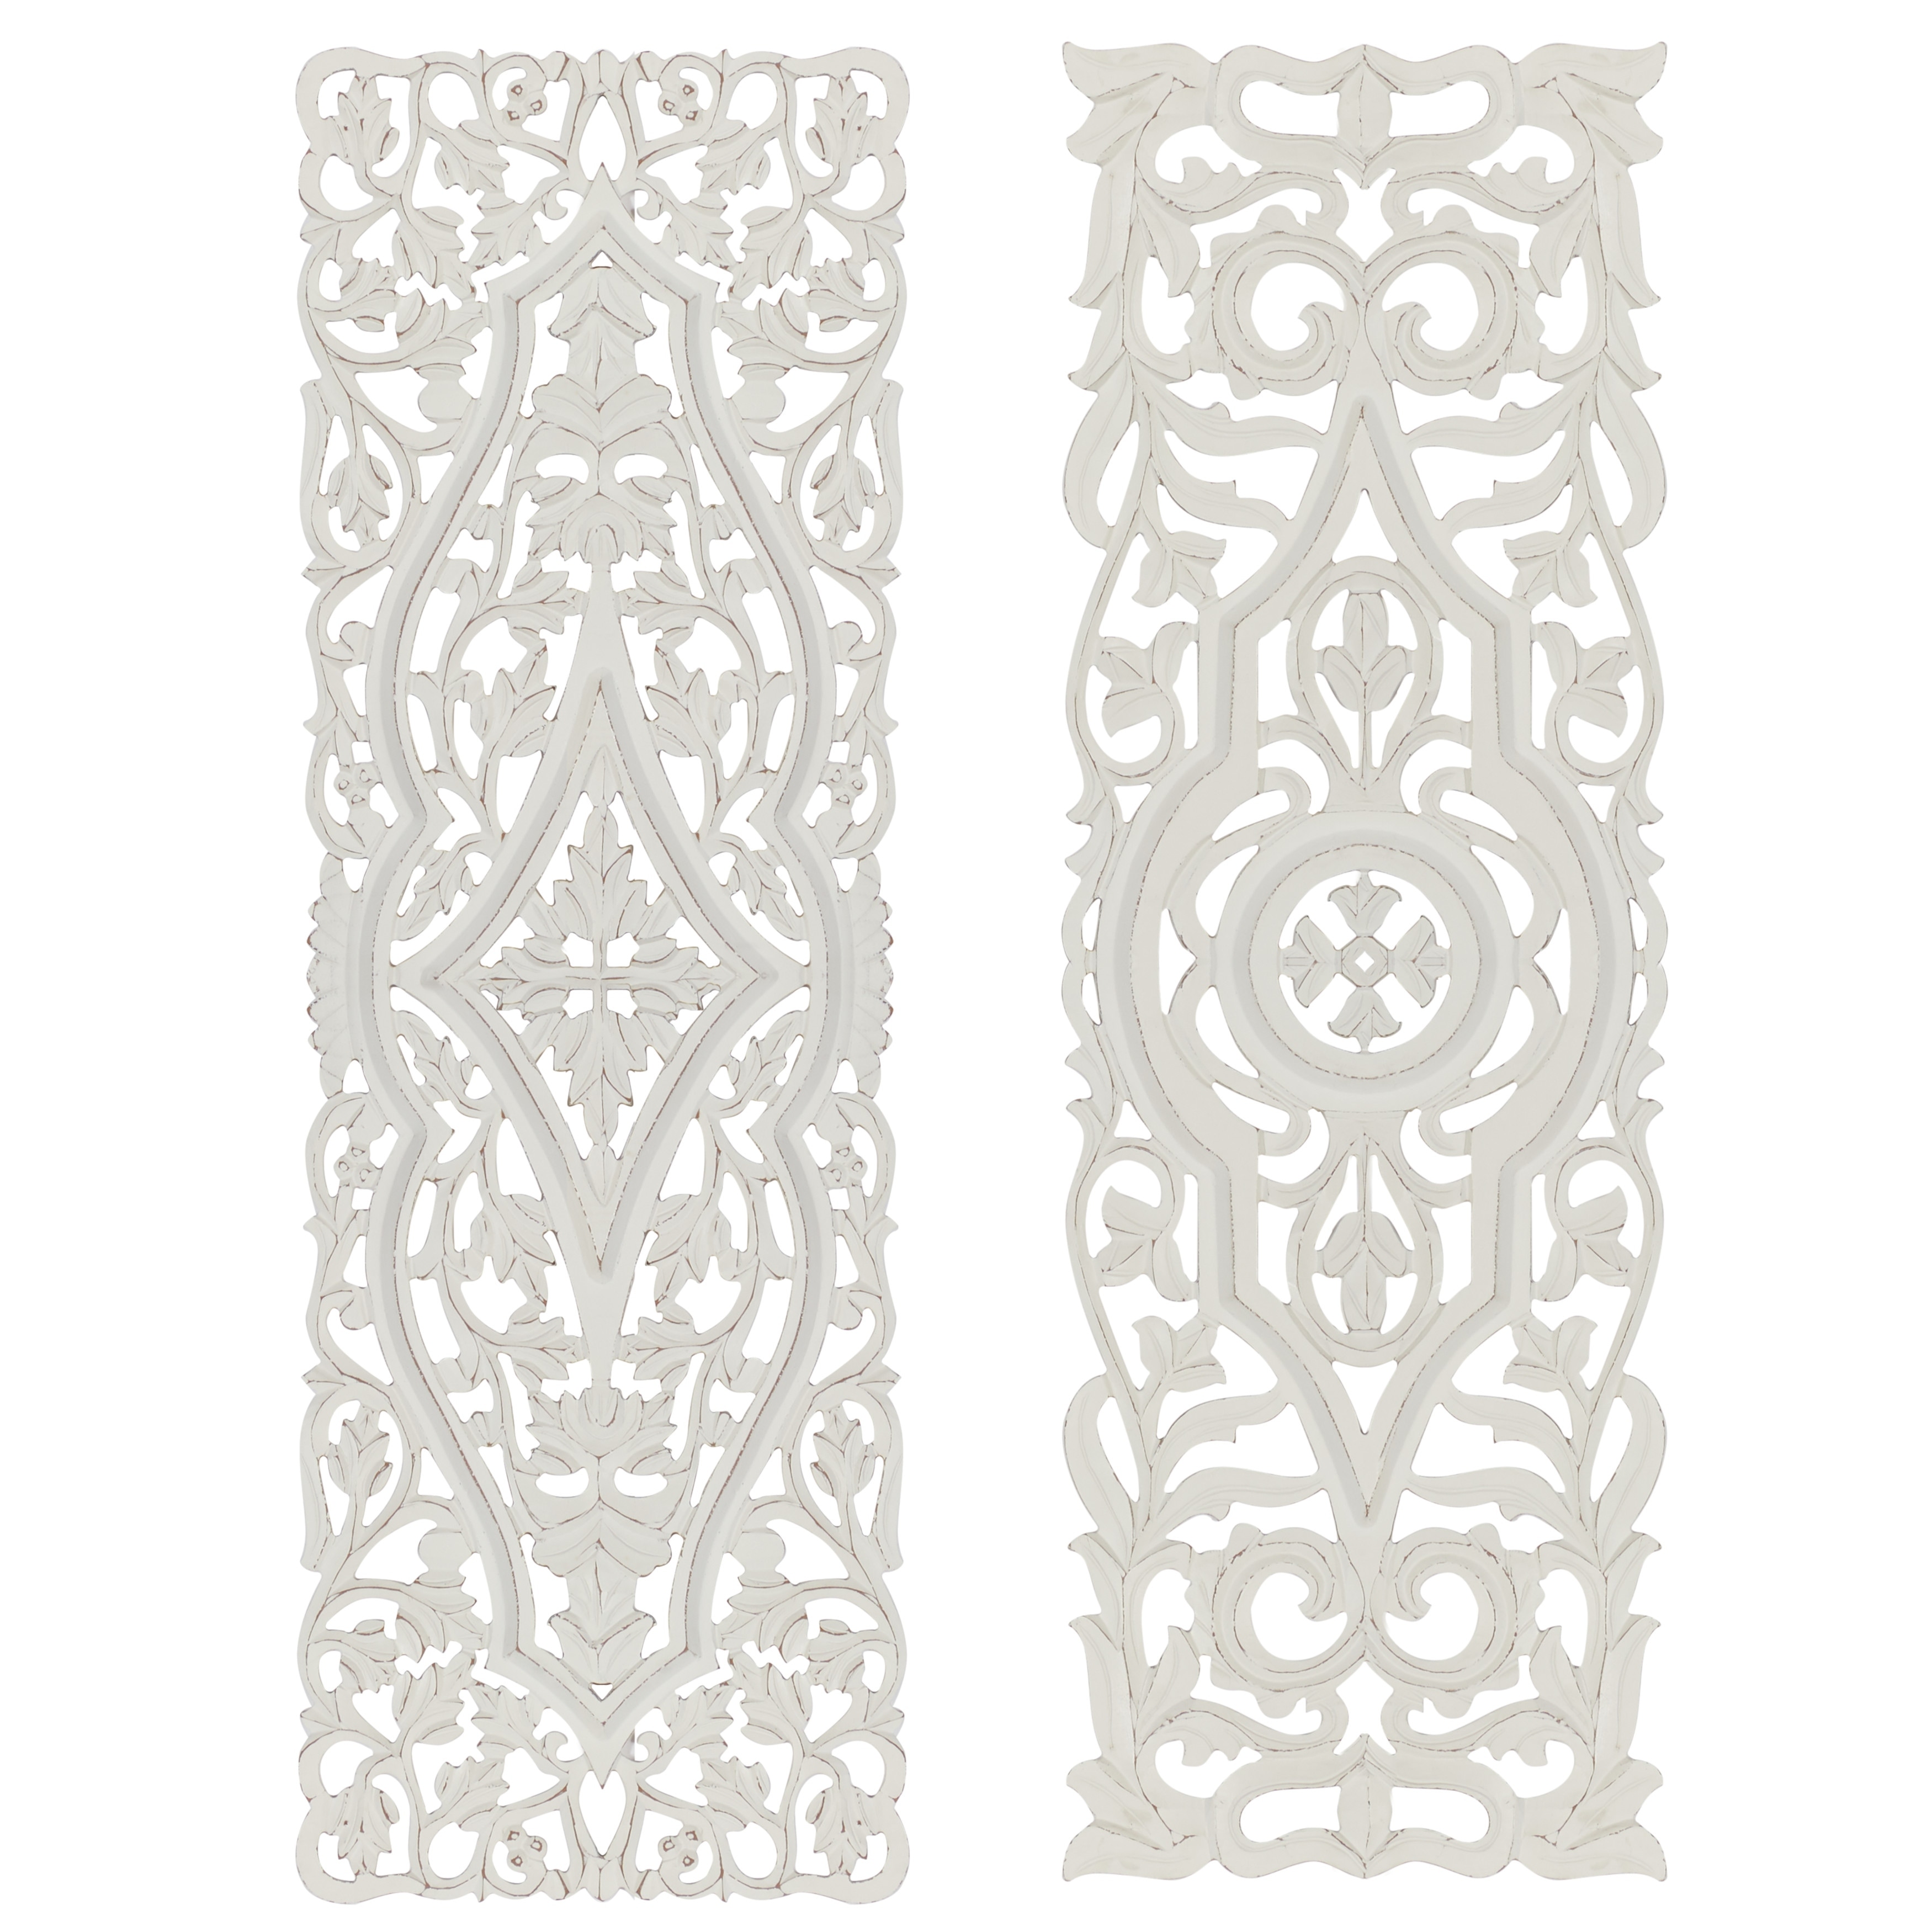 White Wood Handmade Intricately Carved Arabesque Floral Wall Decor (Set of 2)  Bed Bath  Beyond 32112725